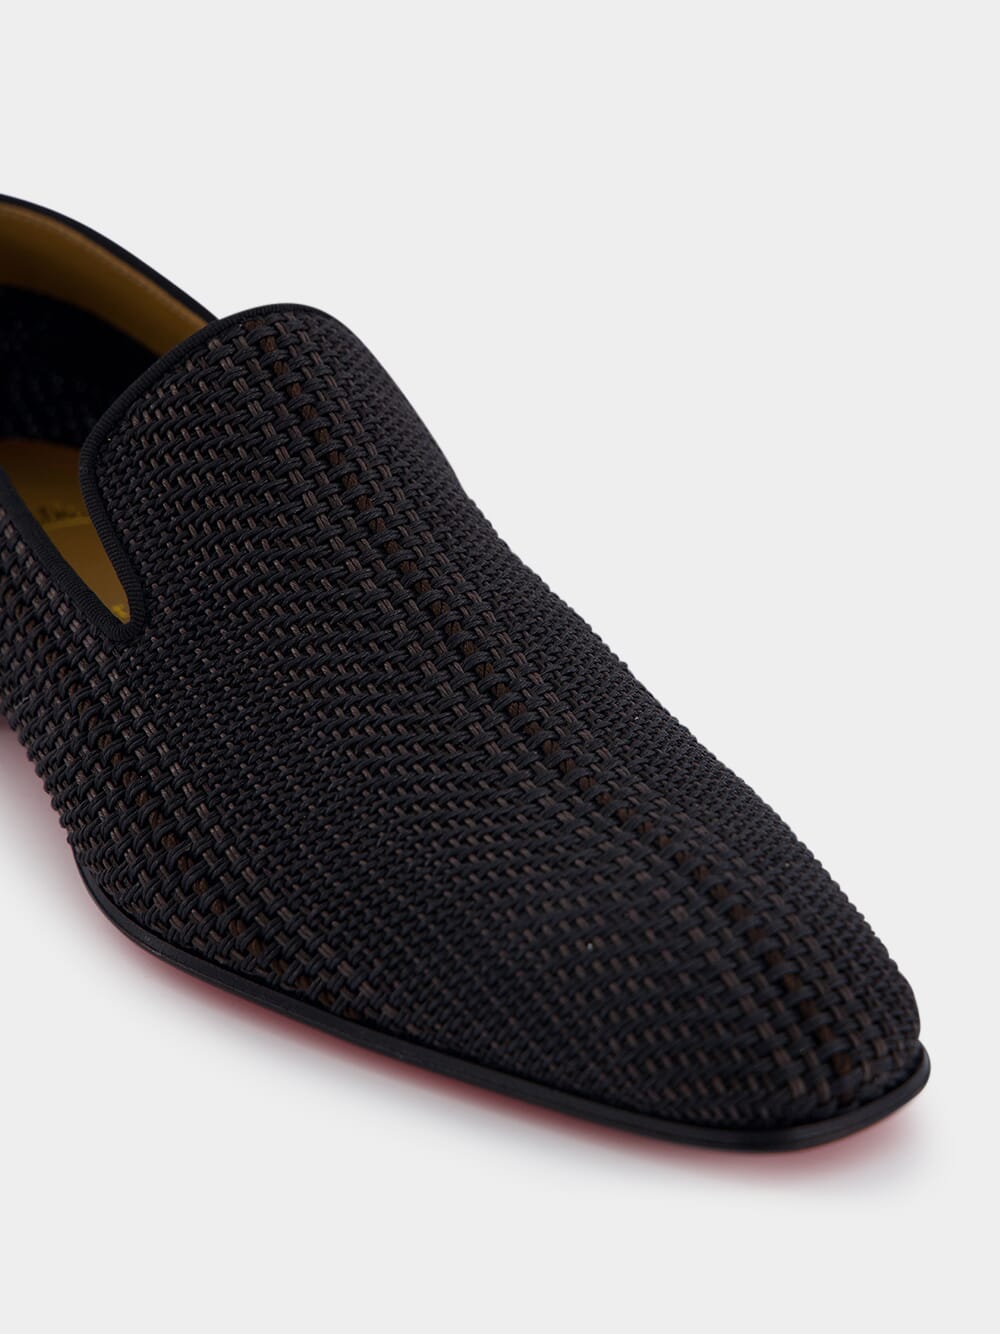 Christian LouboutinAC Dandelion Flat Brown Woven Loafer at Fashion Clinic